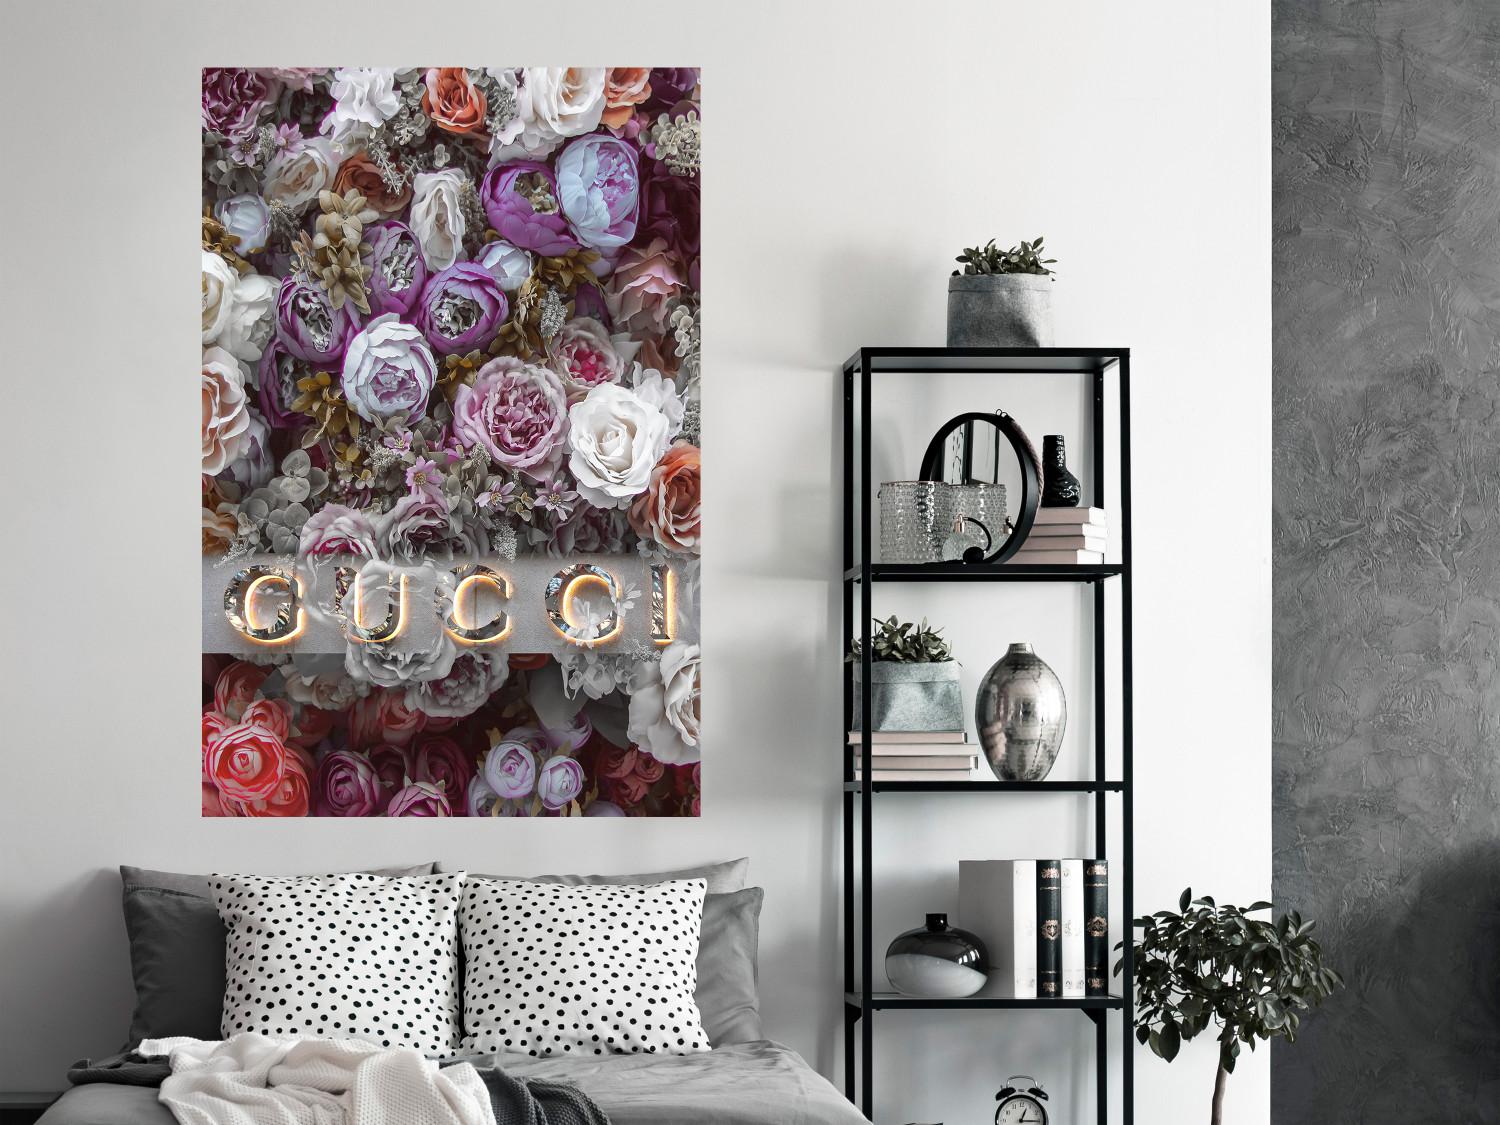 Poster Gucci and Roses - composition of colorful flowers and luxury brand name